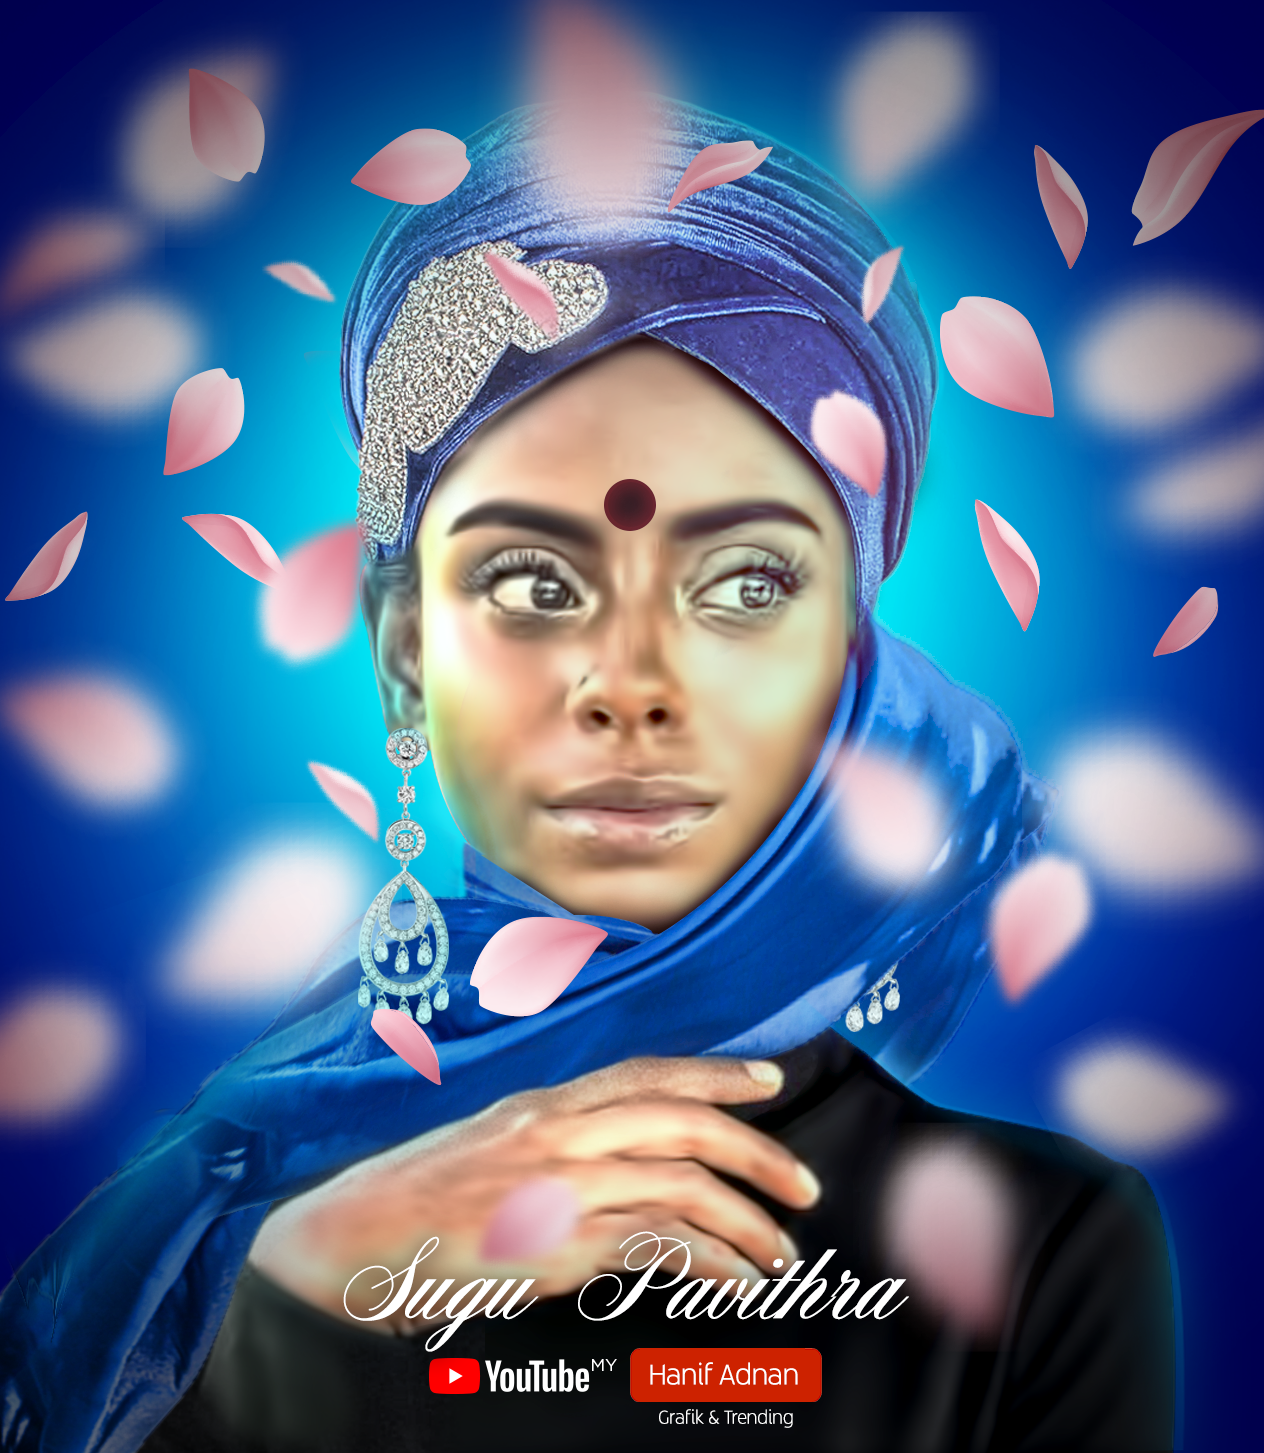 Sugu-Pavithra-Blue-Red-Petals Saya touch up Photoshop gambar Model Sugu Pavithra (Download Full Size)